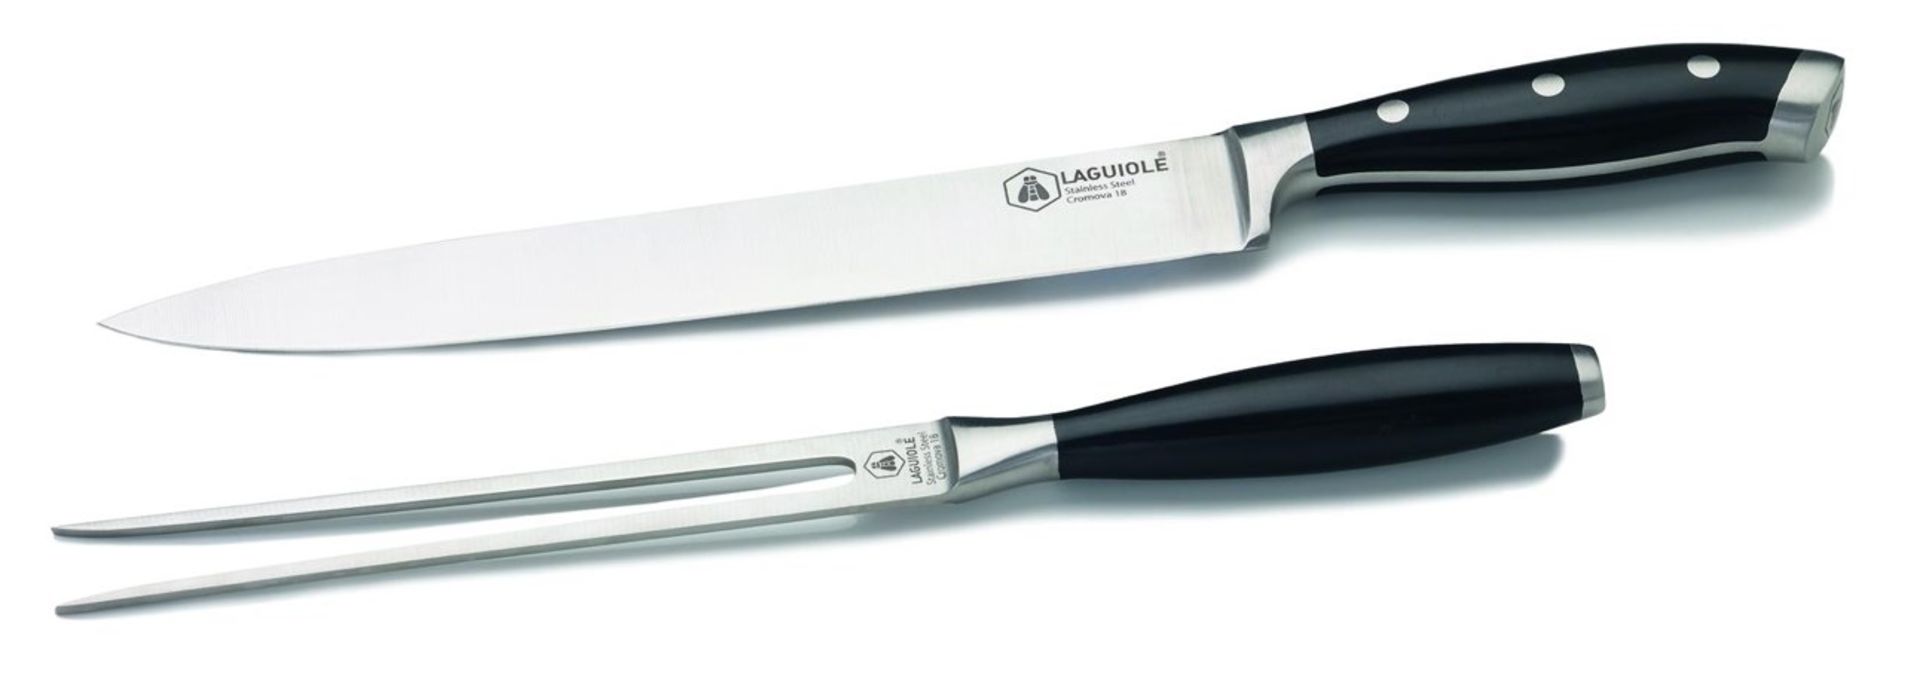 V Brand New Laguiole Meat Carving Set with Carving Knife and Meat Fork - Amazon price £24.99